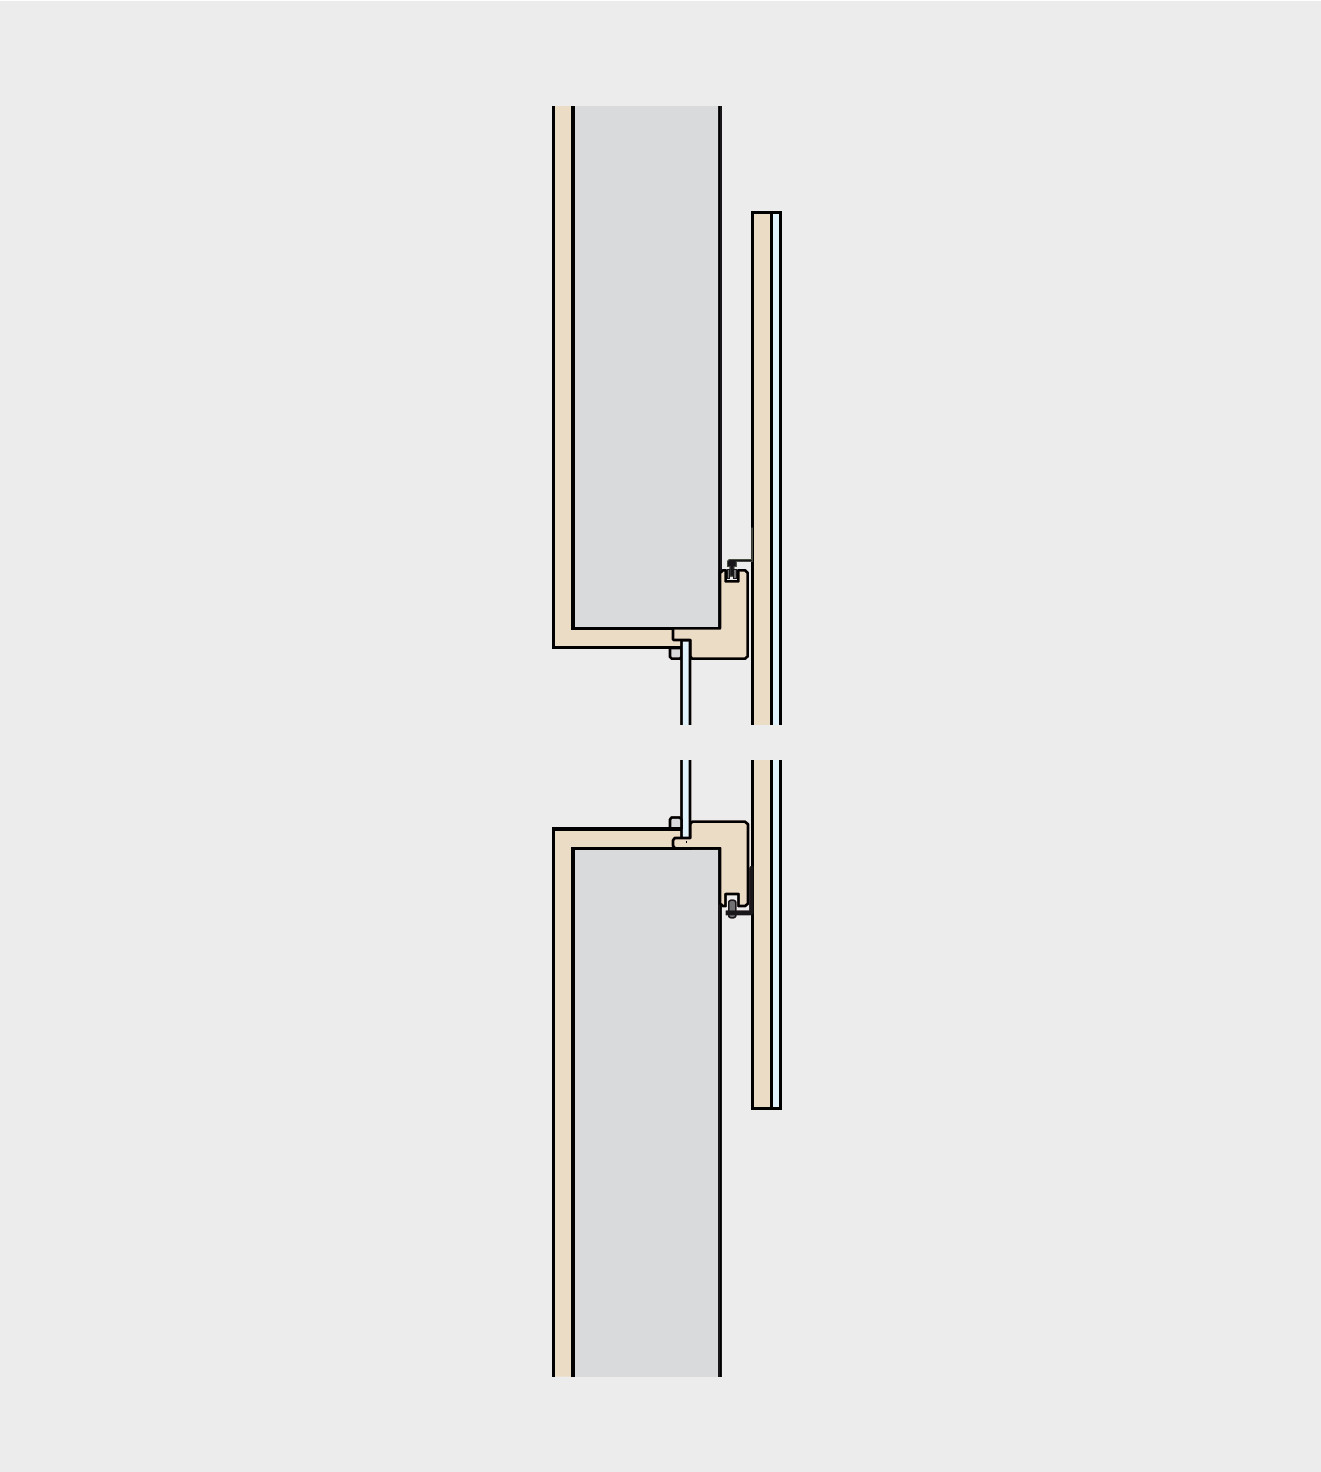 Sectional drawing of sliding mirror